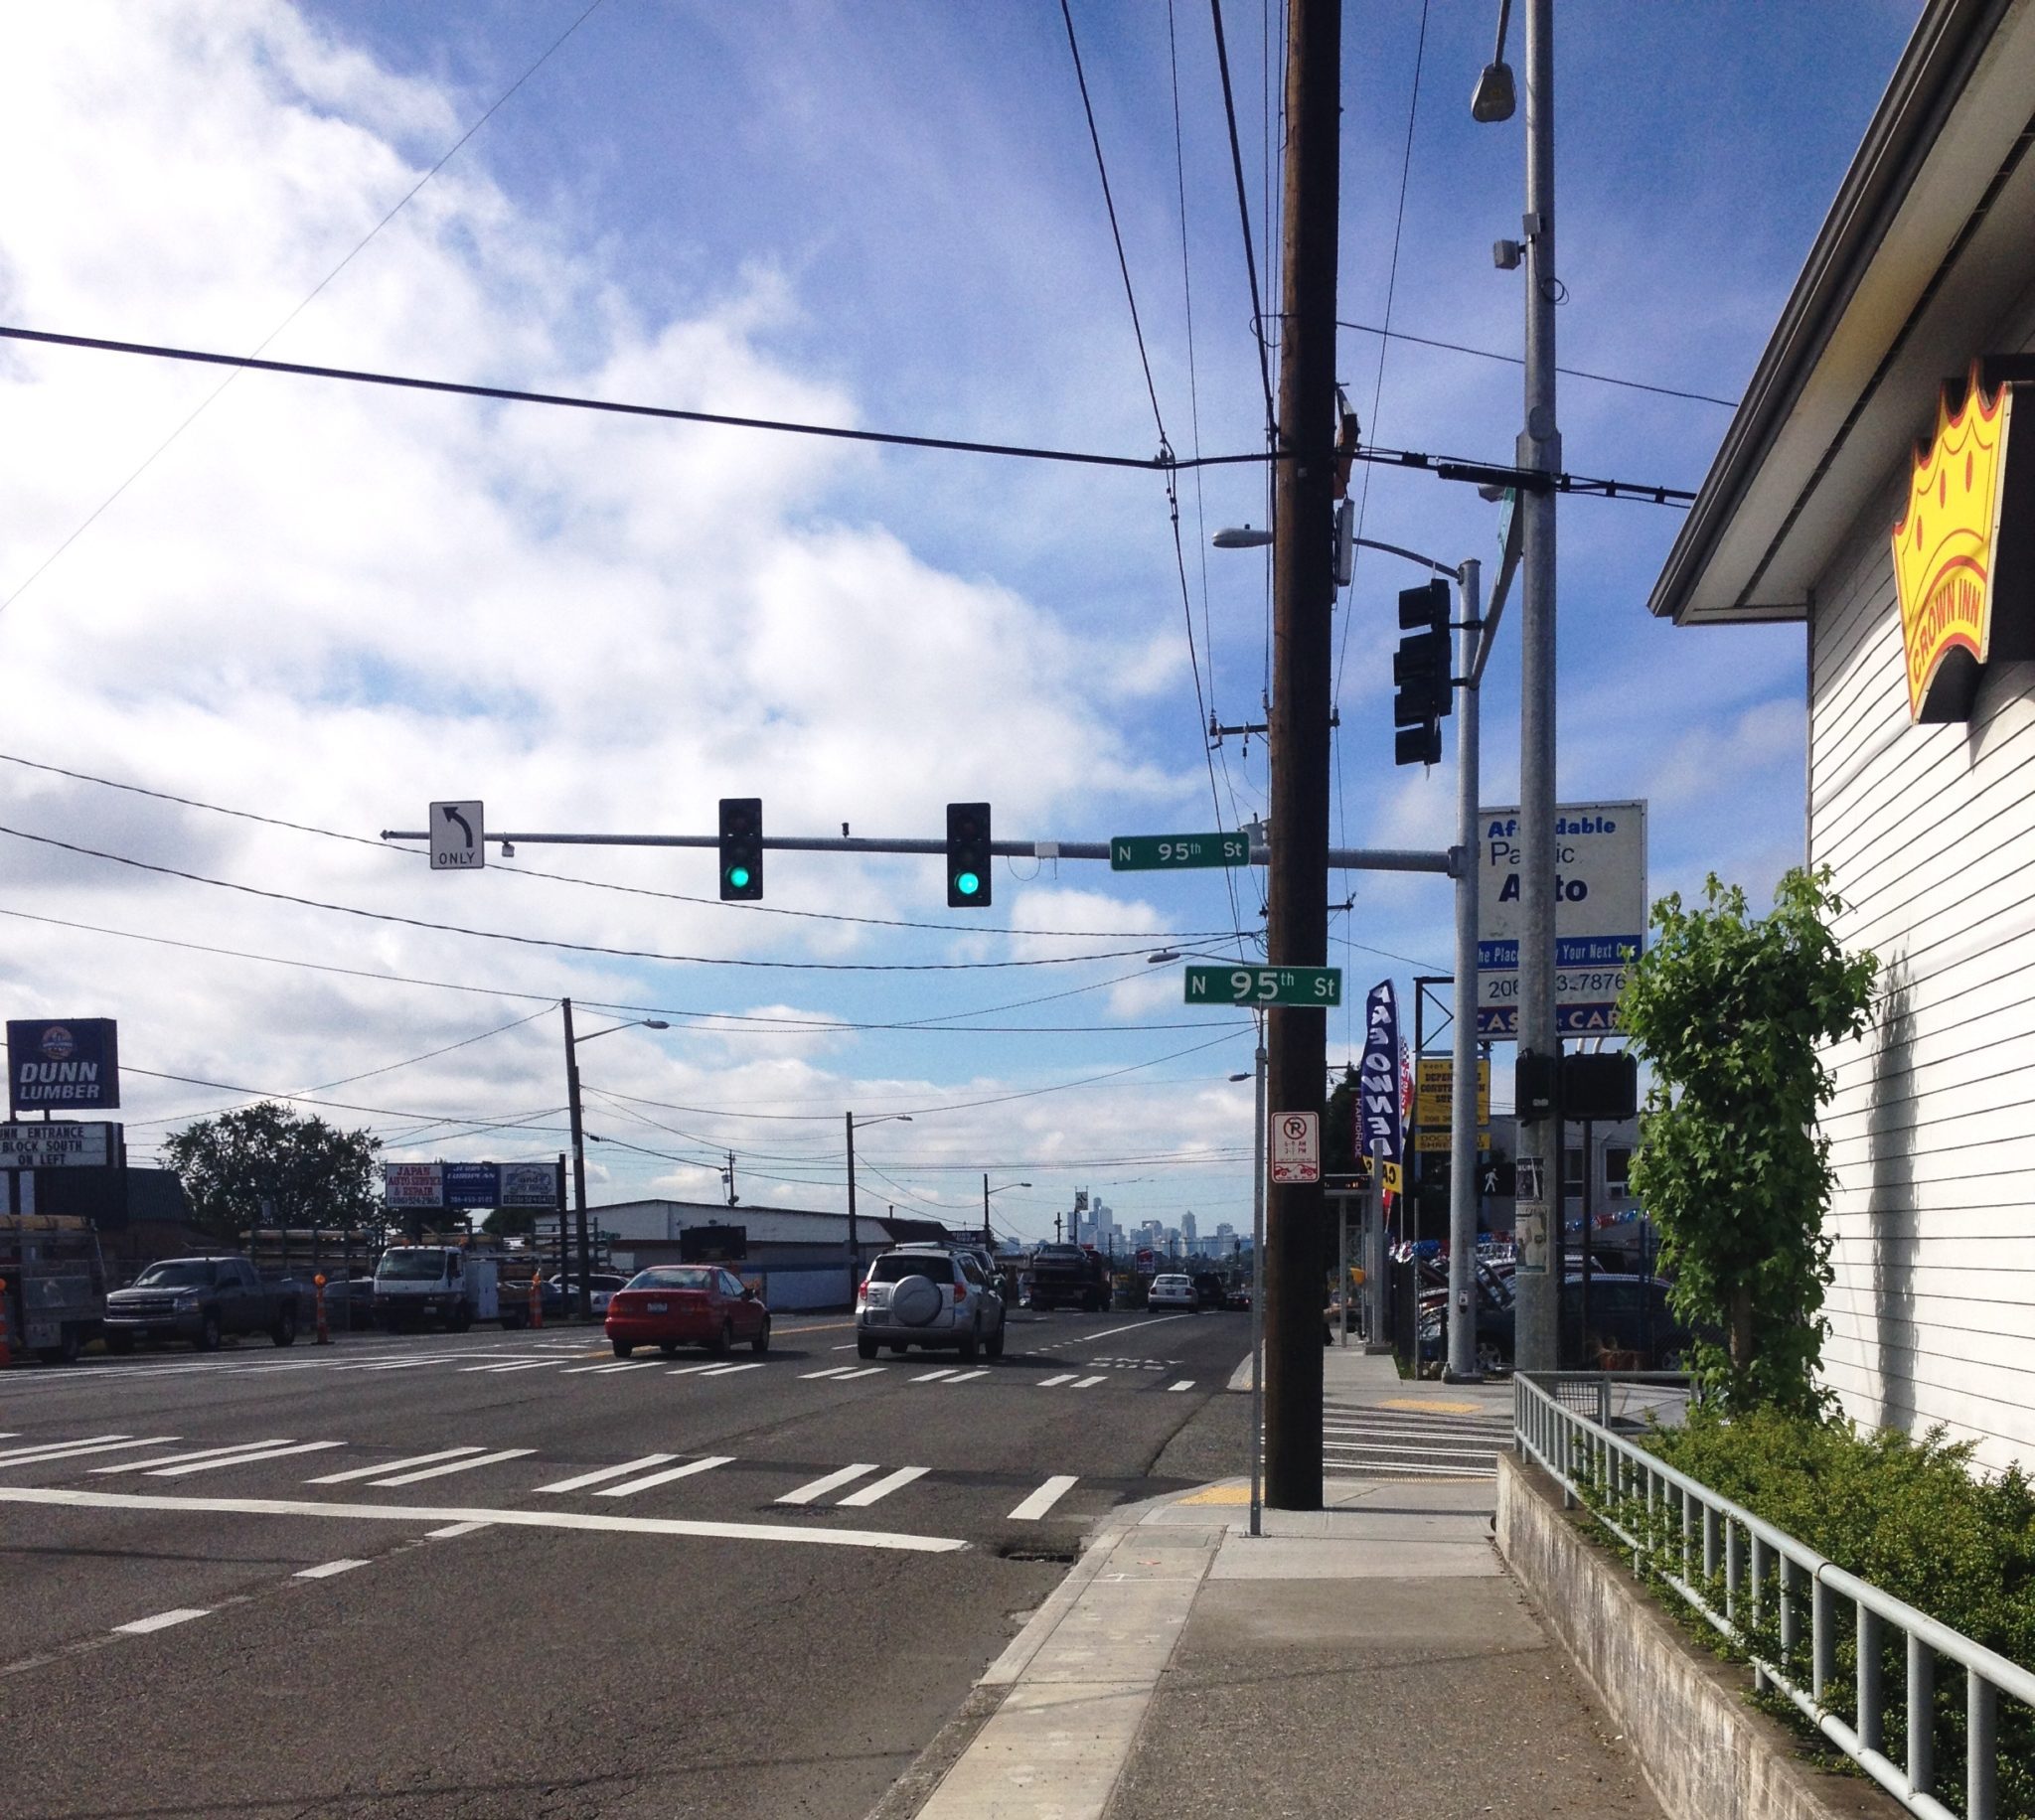 The intersection of Aurora Ave N and N 95th St, in north Seattle’s Licton Springs neighborhood.